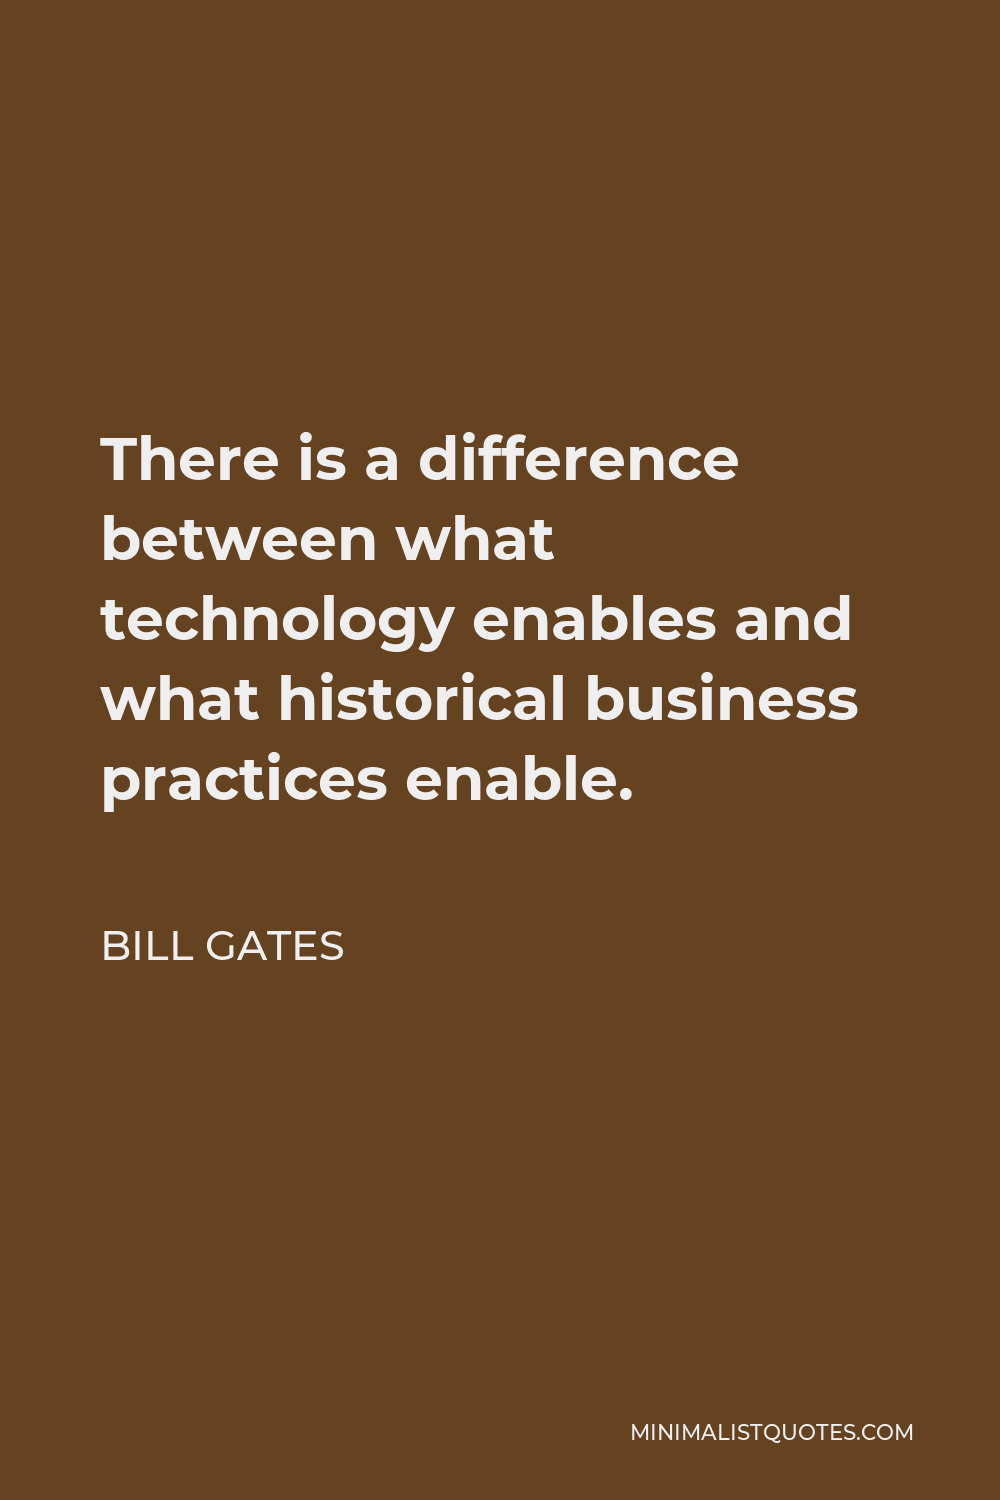 Bill Gates Quote - There is a difference between what technology enables and what historical business practices enable.